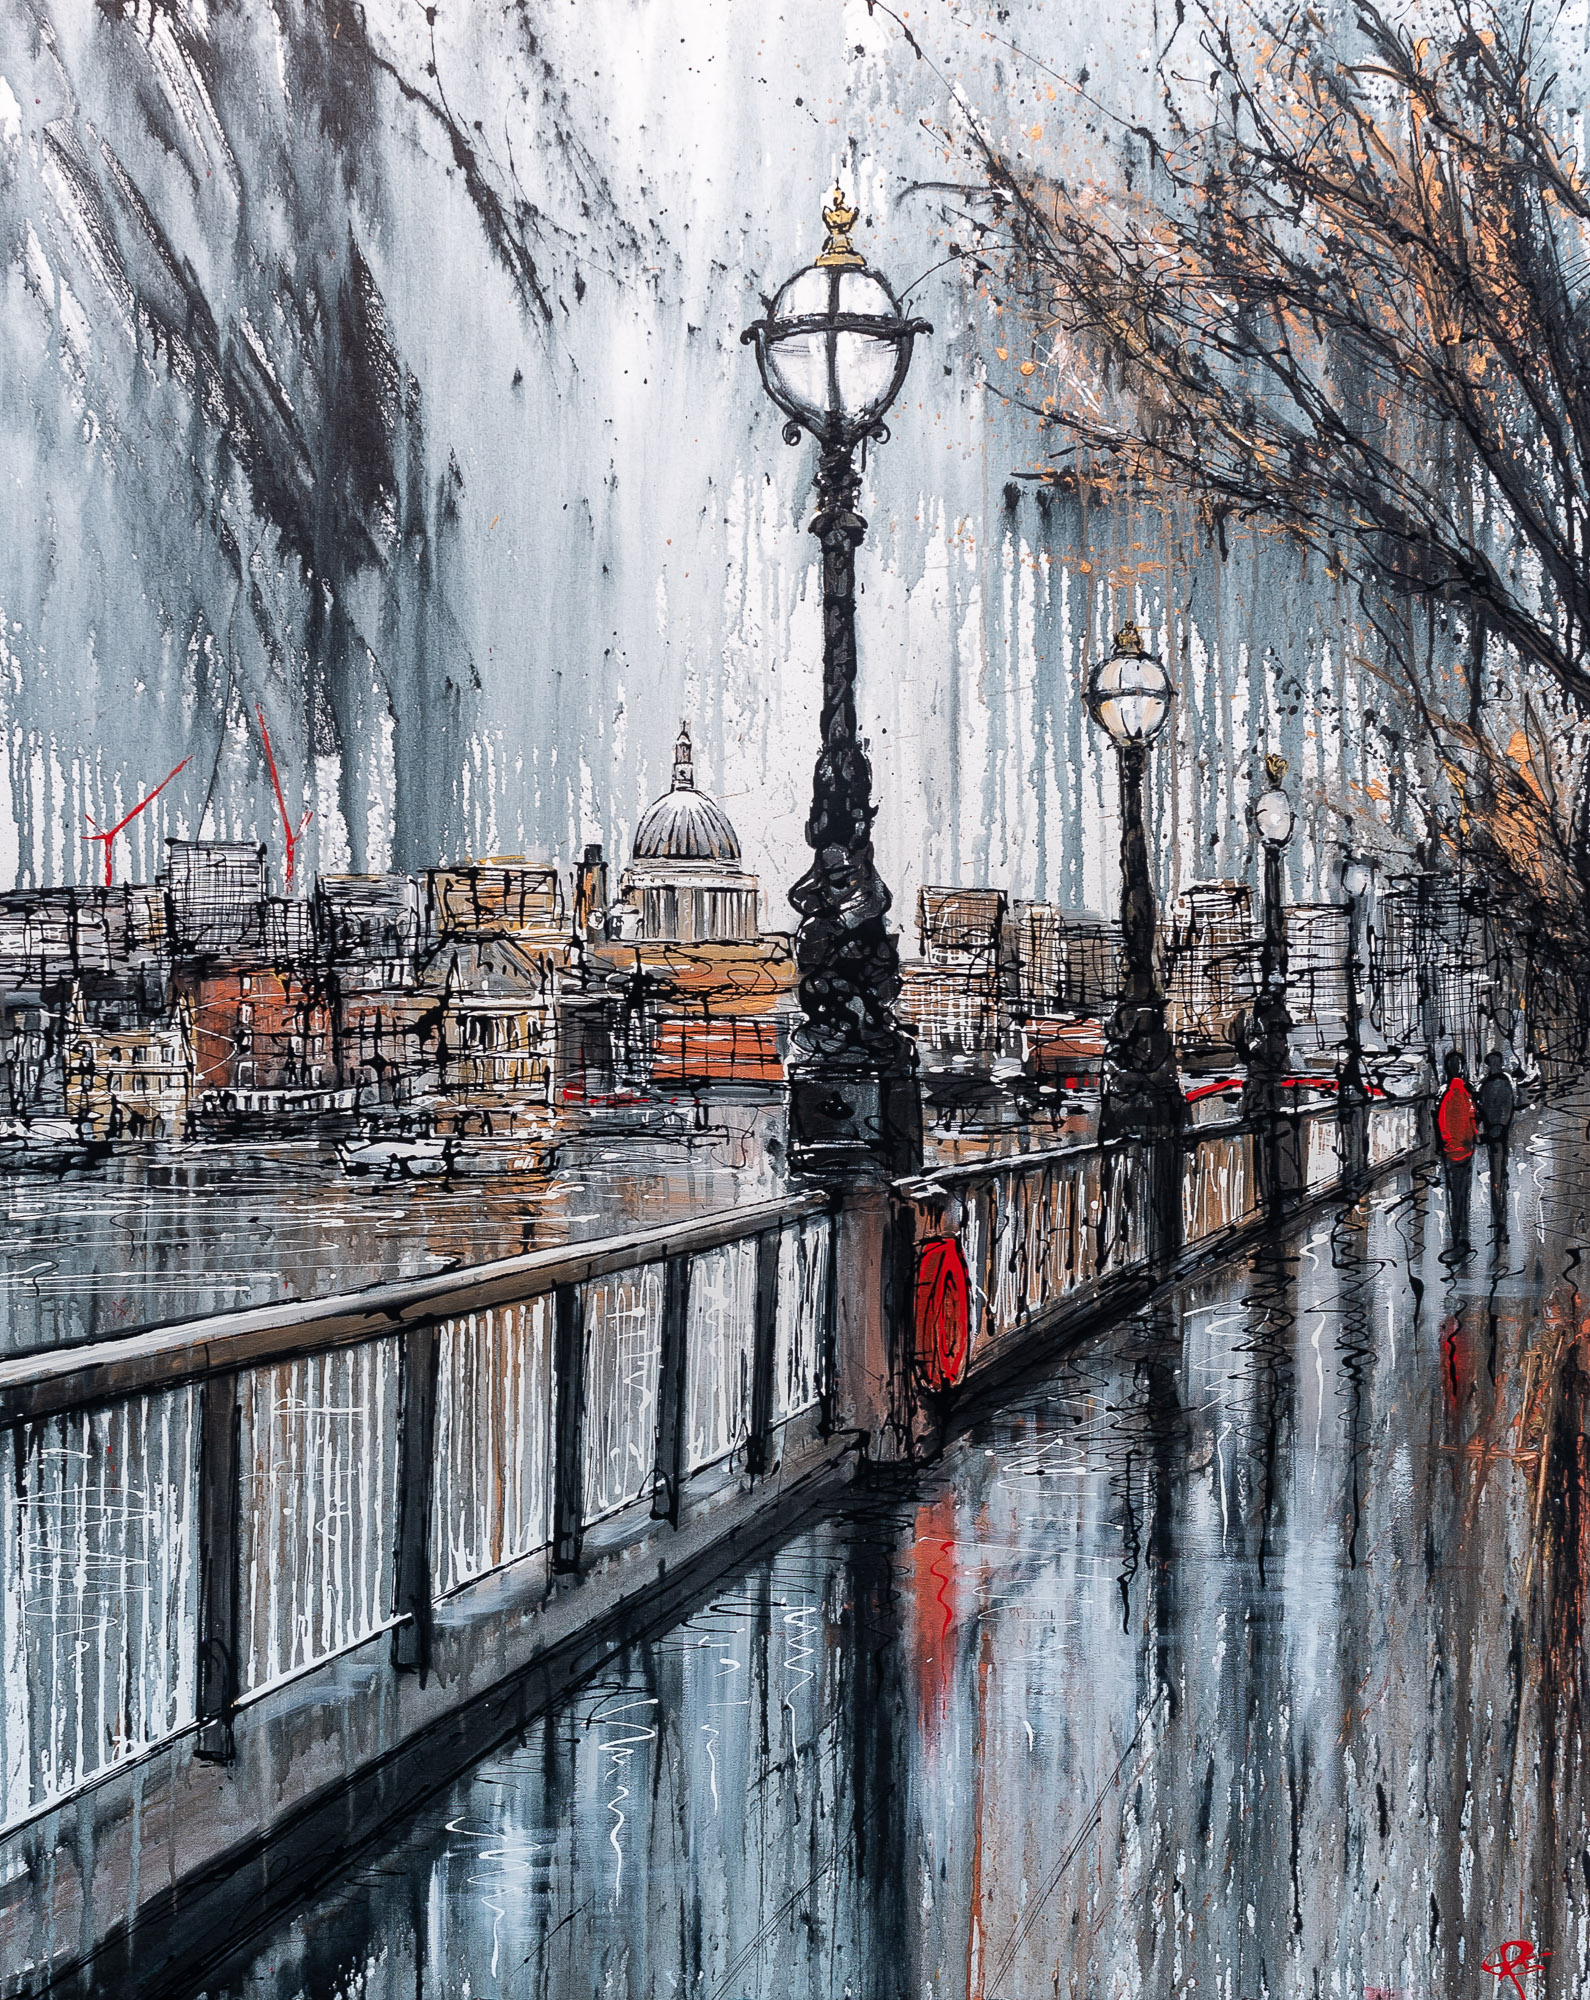 Thames Stroll by Paul Kenton, UK contemporary cityscape artist, An Original Painting of Southbank London from his London Collection